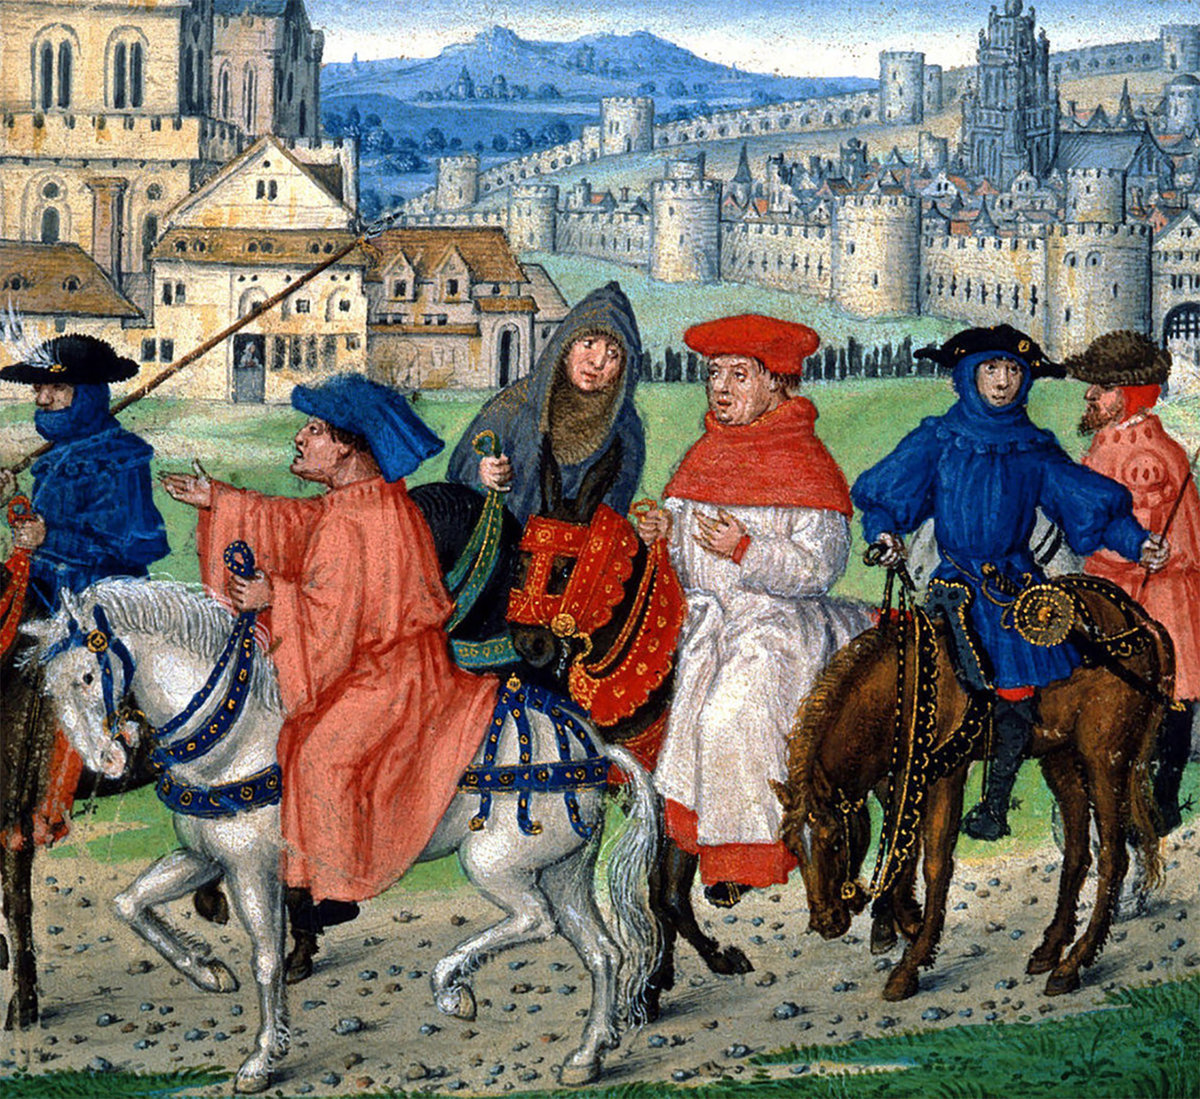 The Canterbury Tales: The Man of Law and Race in the Middle Ages -  Brewminate: A Bold Blend of News and Ideas